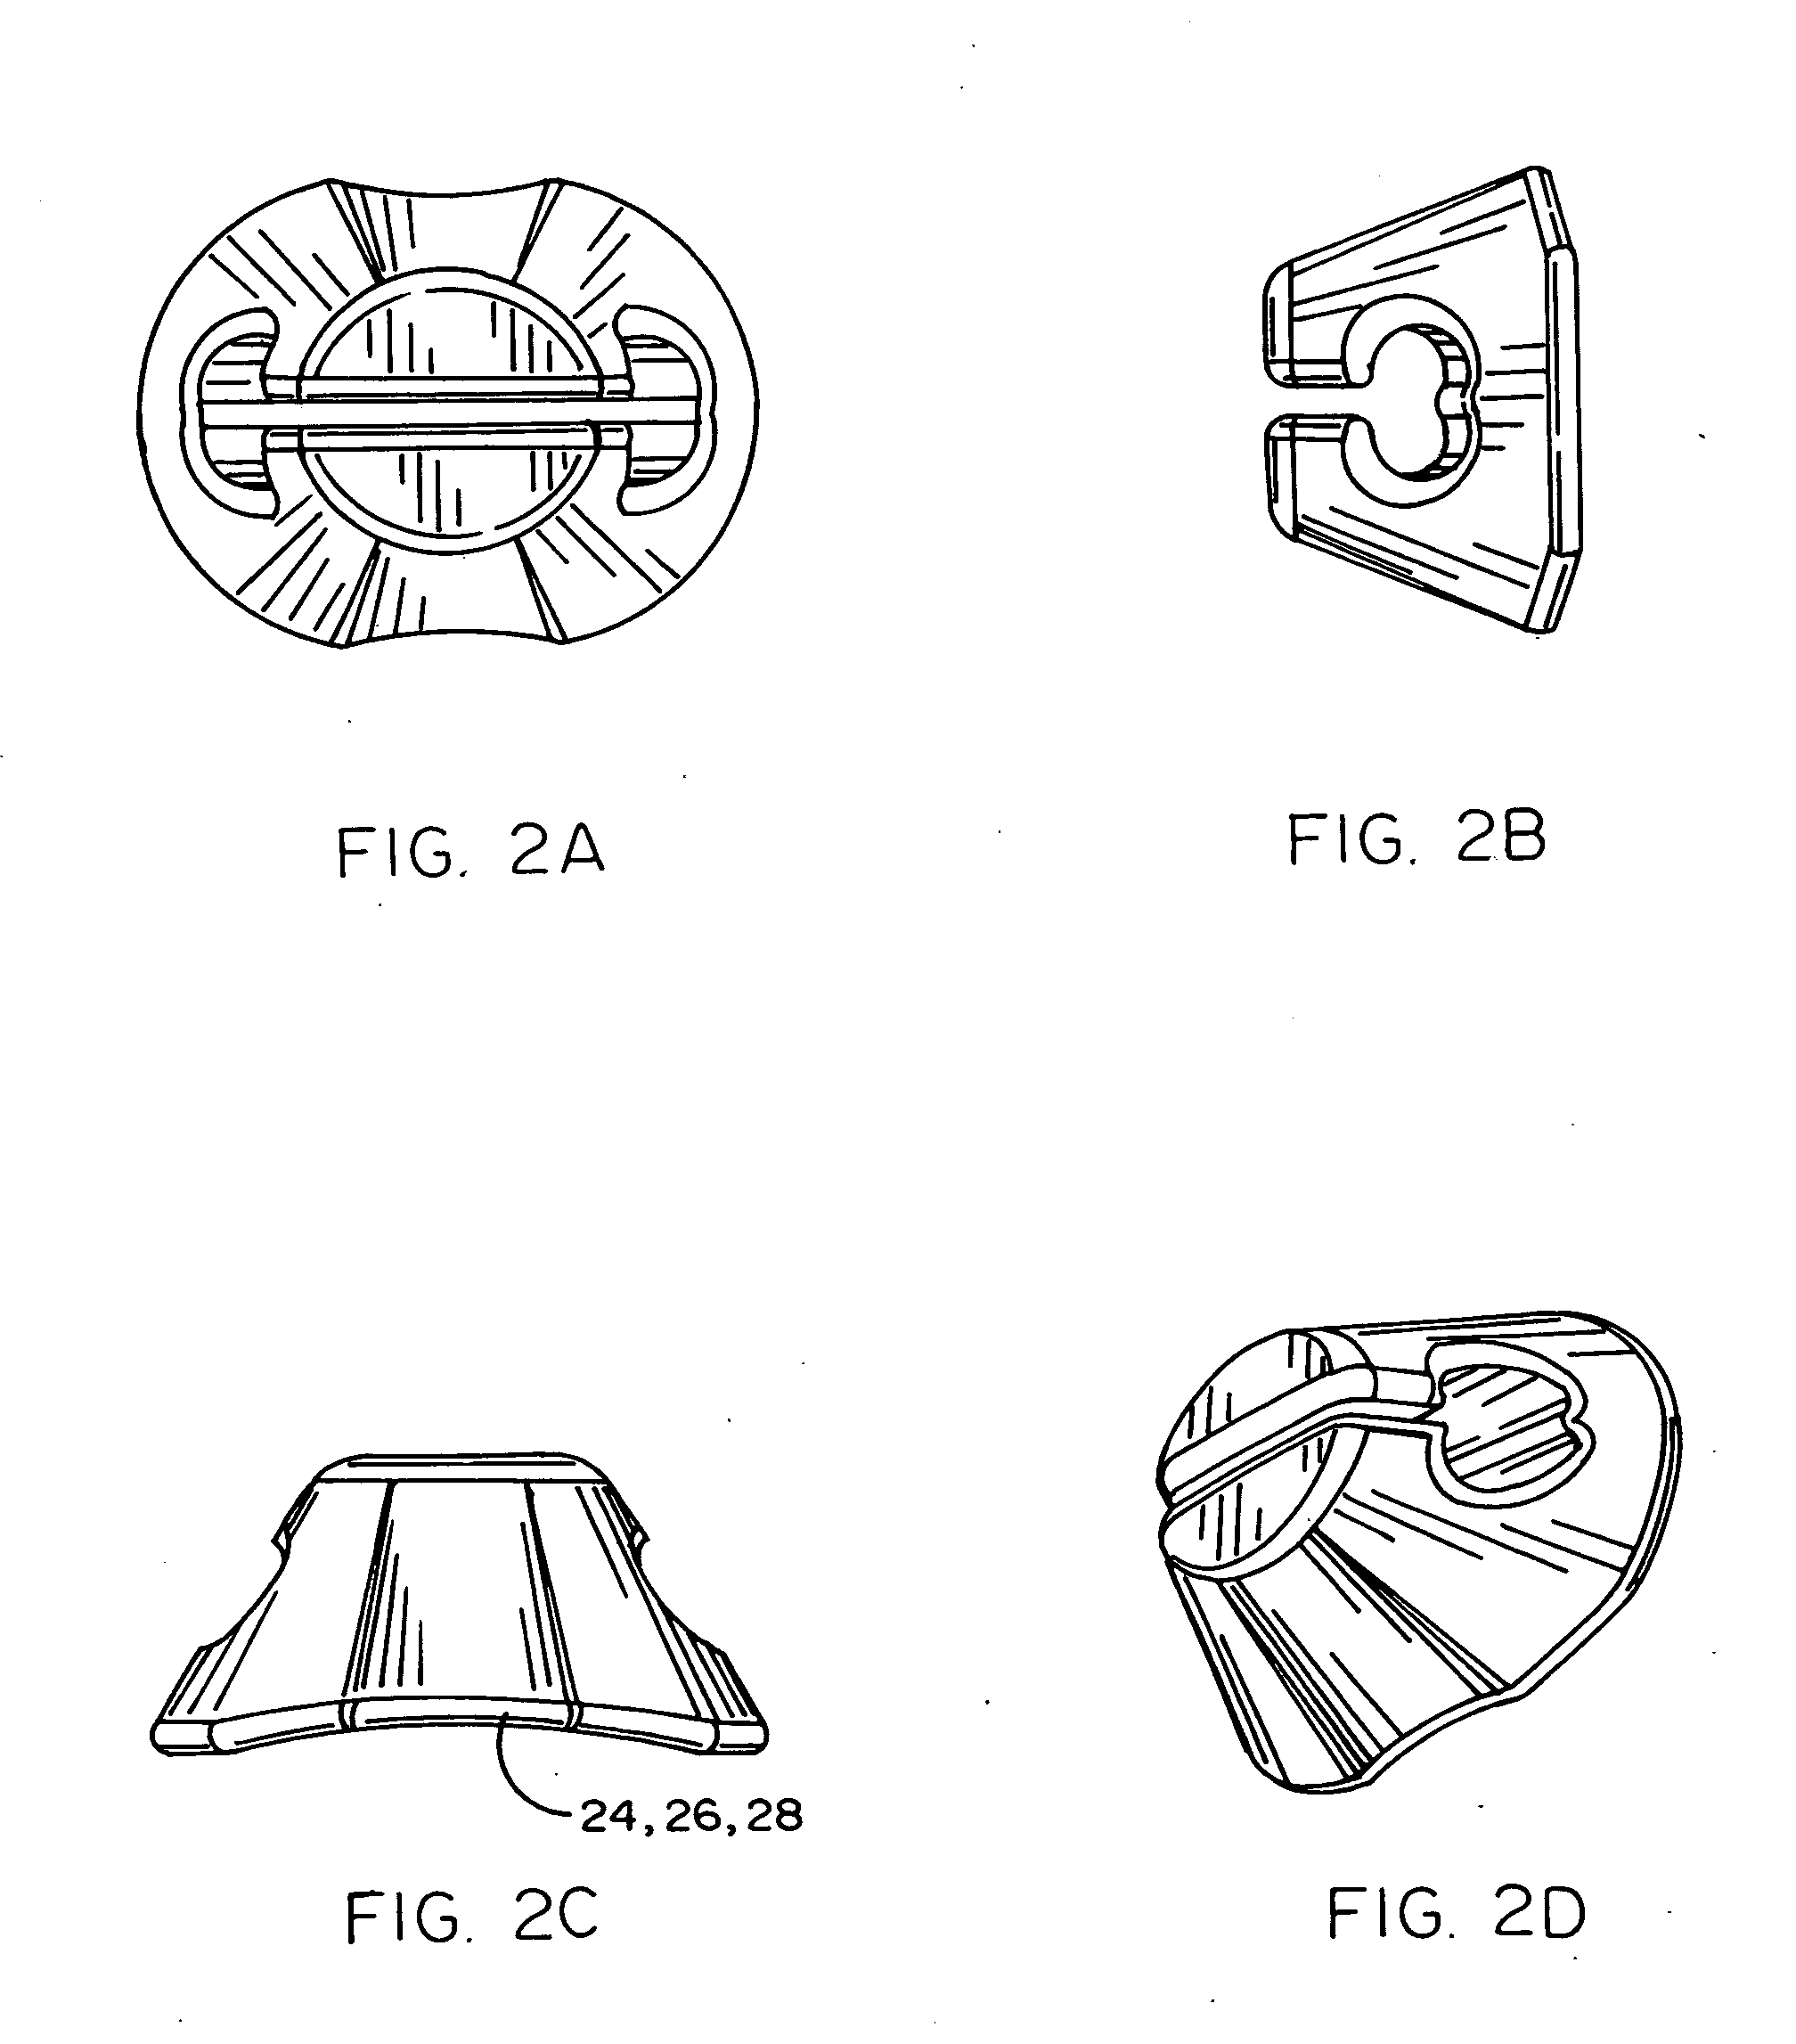 Adjustable oral appliance for treatment of snoring and sleep apnea